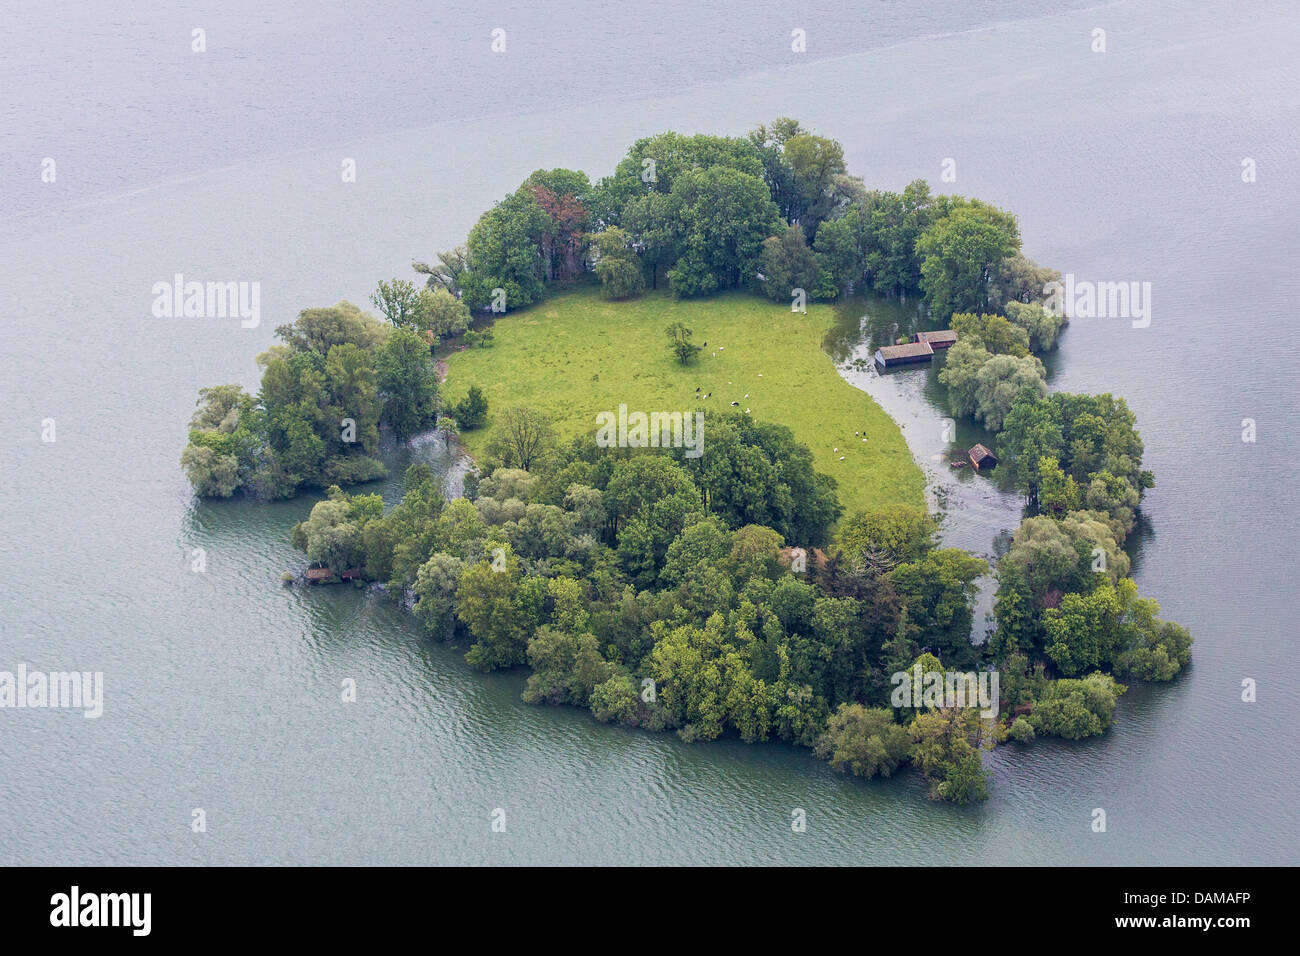 island Krautinsel in lake Chiemsee with cows flooded in June 2013, Germany, Bavaria, Lake Chiemsee Stock Photo